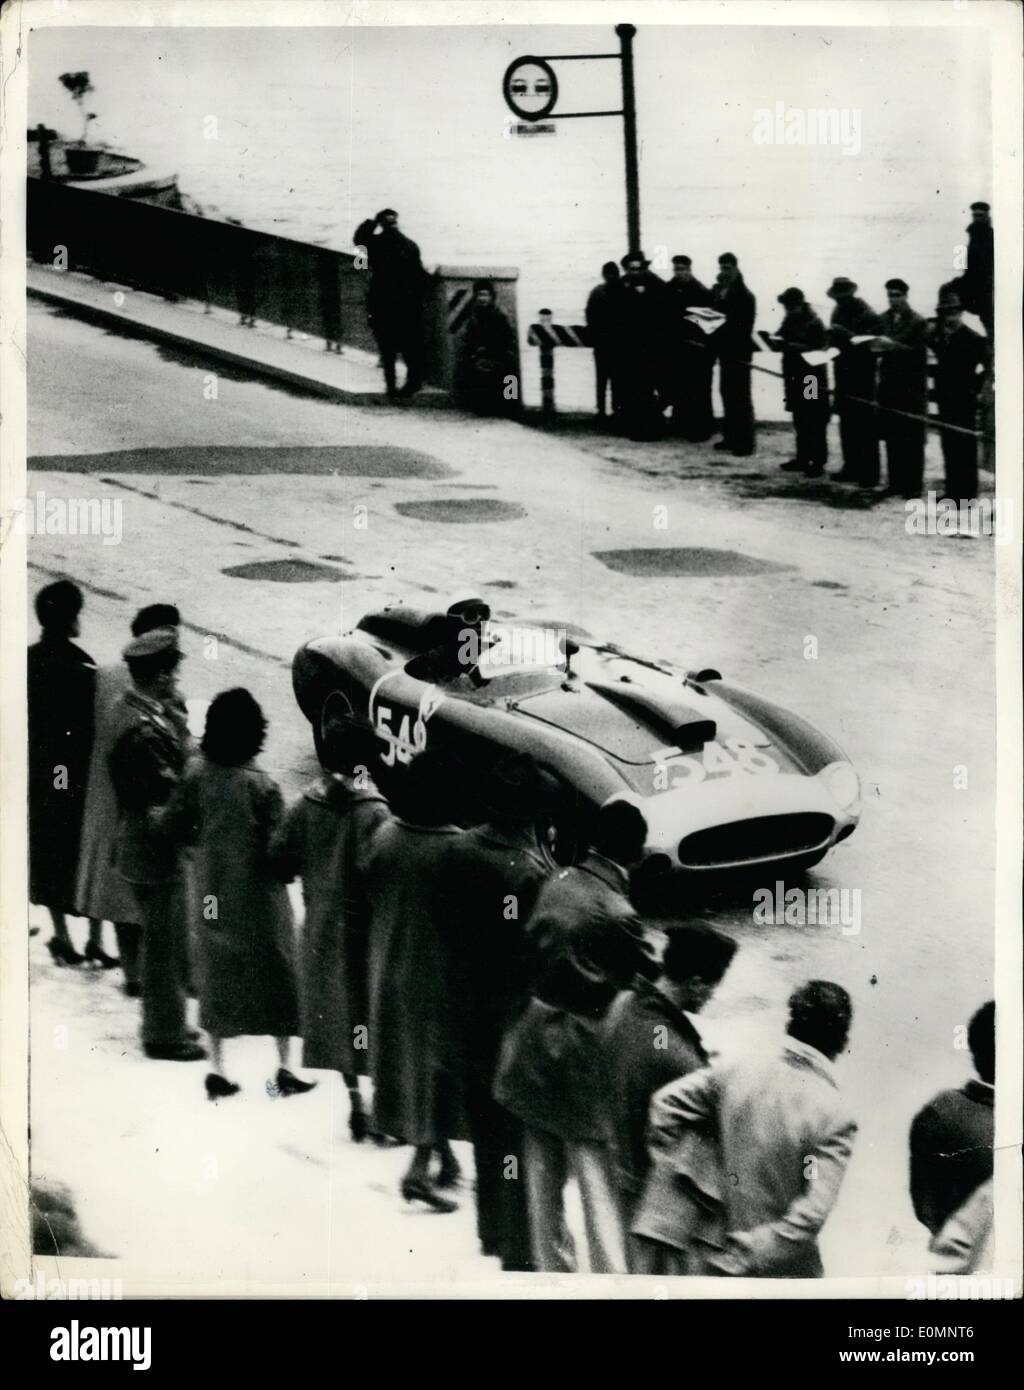 Apr. 04, 1956 - Castelotti wins Mille Miglia road race. Average speed of 85 M.P.H. The Annual 1,000 mile Mille Miglia car race through Italy was won by 24 year old Figenio Castelotti in a 12 cylinder 3 1/2 litre Ferrari at an average speed of 85 m.p.h. Photo shows Onlookers watch as Castelotti races through Peschiers during the Mille Miglia which he won. Stock Photo